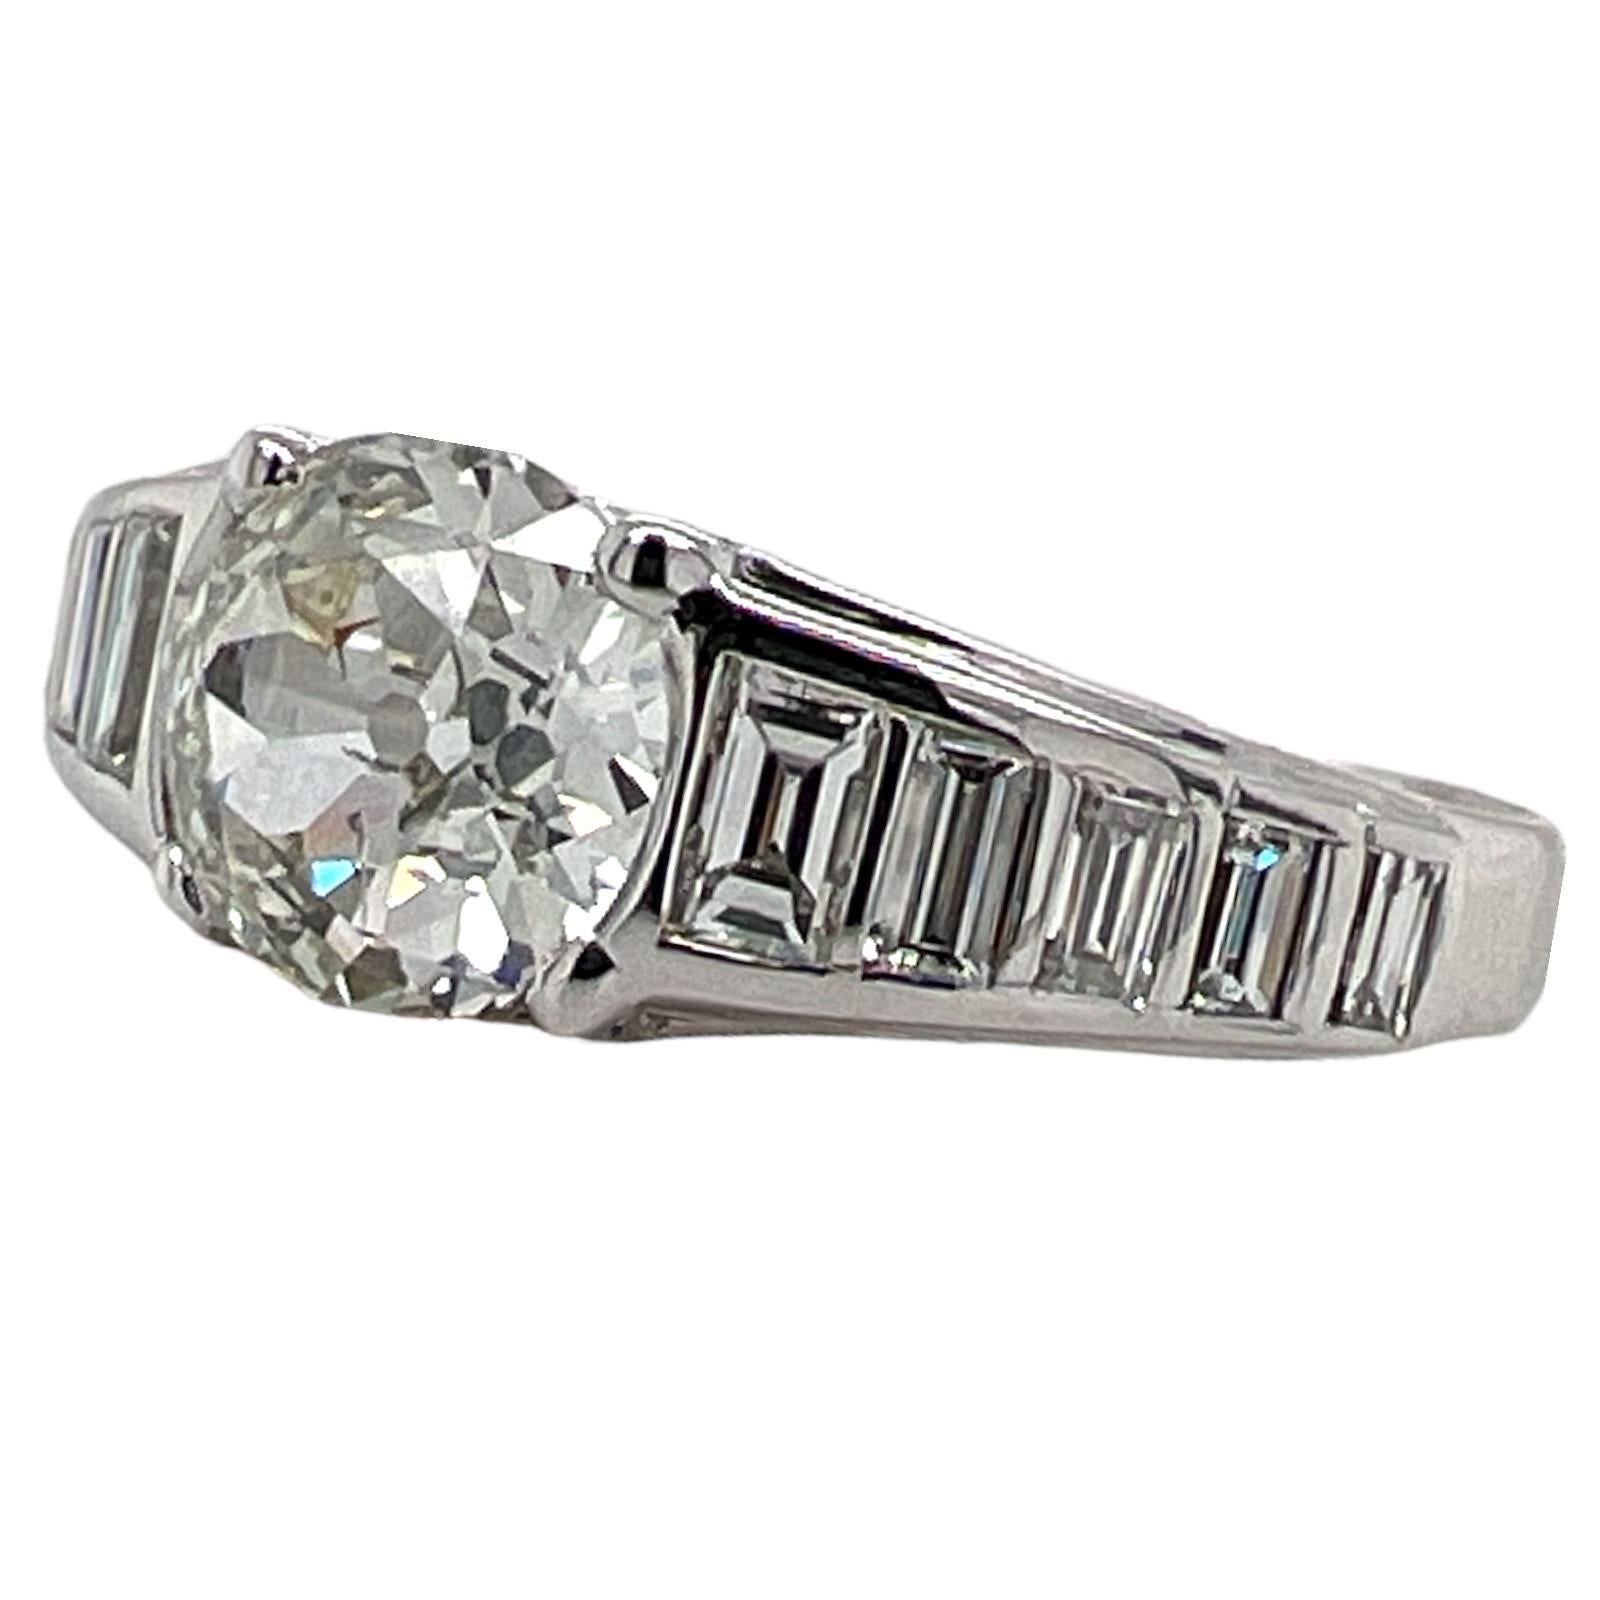 Estate diamond engagement ring crafted in platinum. The ring features an approximately 1.67 carat Old European cut diamond graded J-K color and SI clarity. The platinum mounting is set with 10 baguette diamonds weighing approximately .60 CTW. The